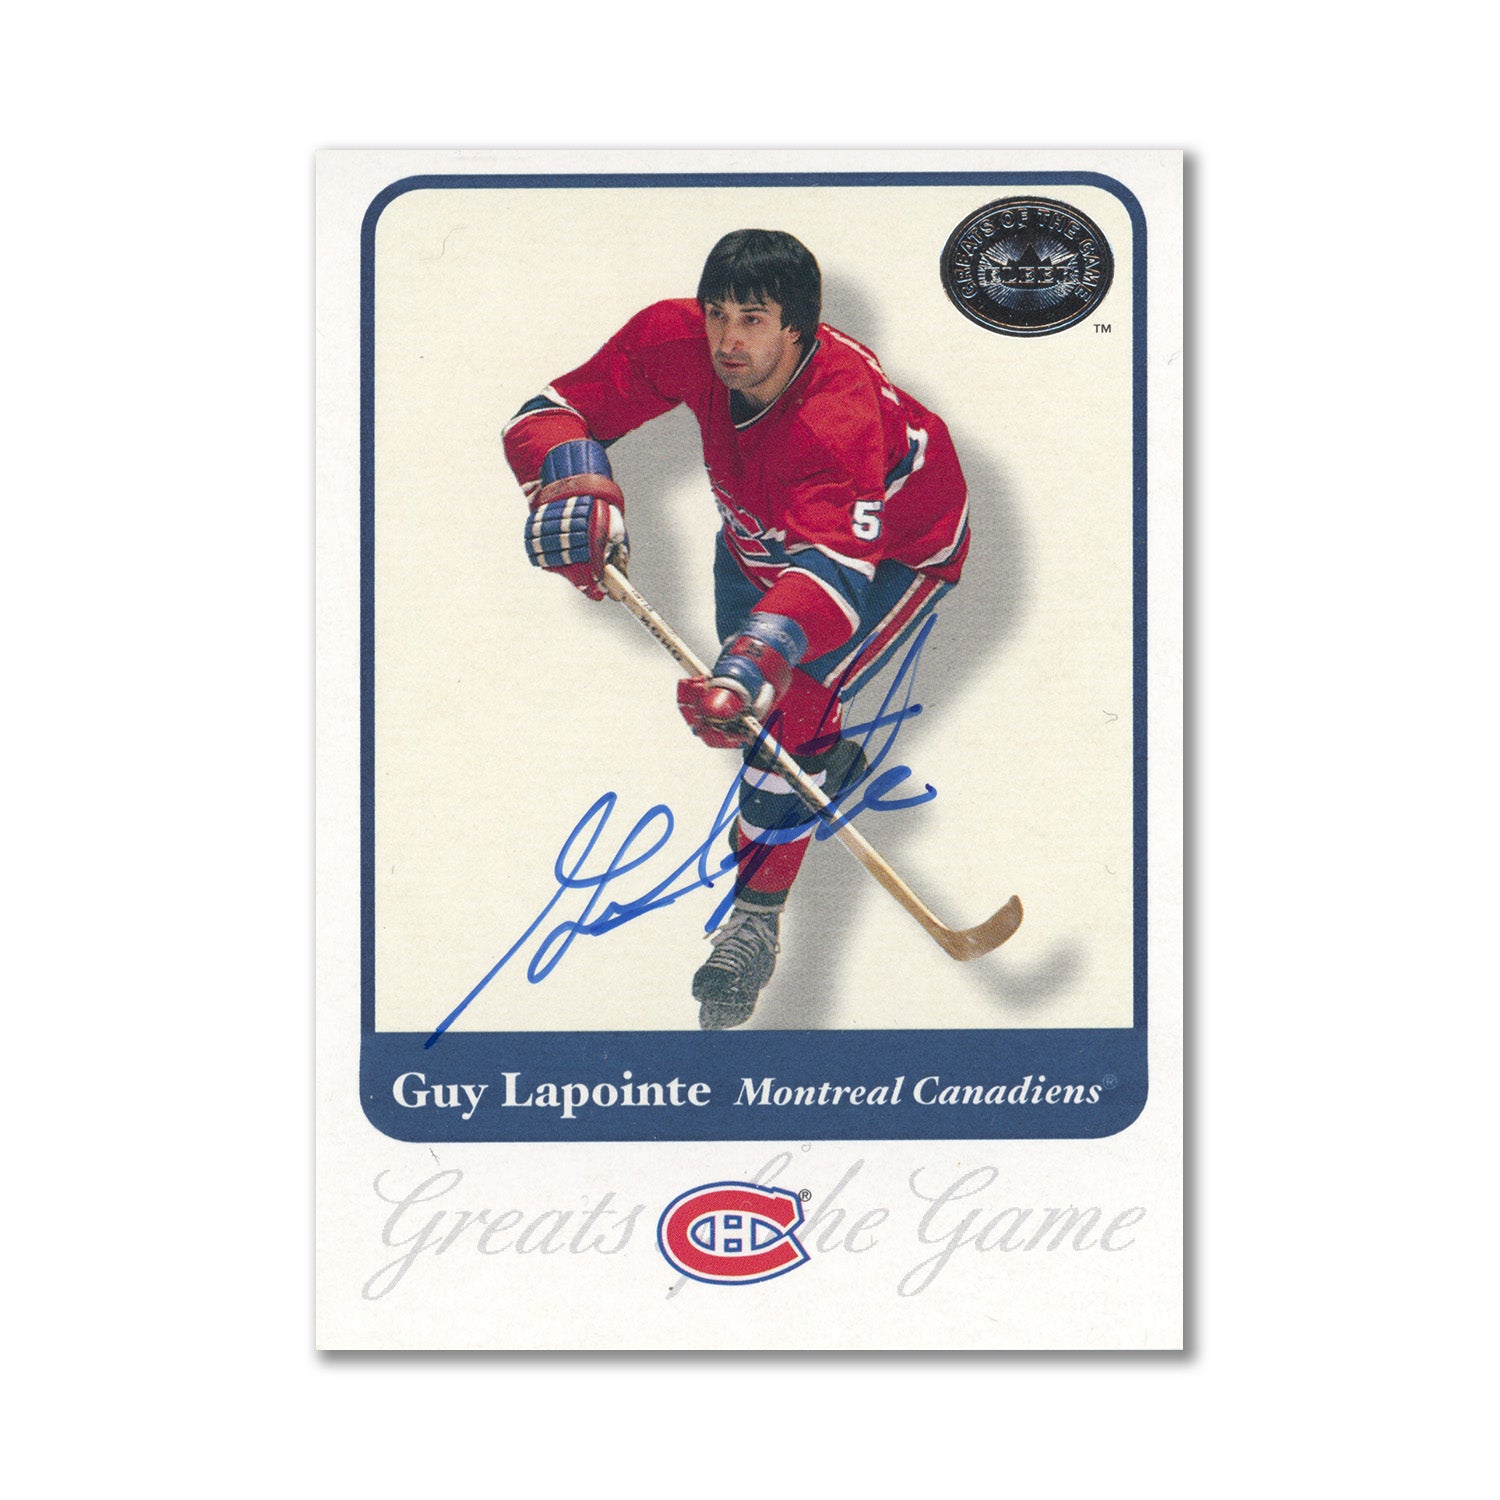 Autographed 2001-02 Fleer Greats of the Game #20 Guy Lapointe Base Card